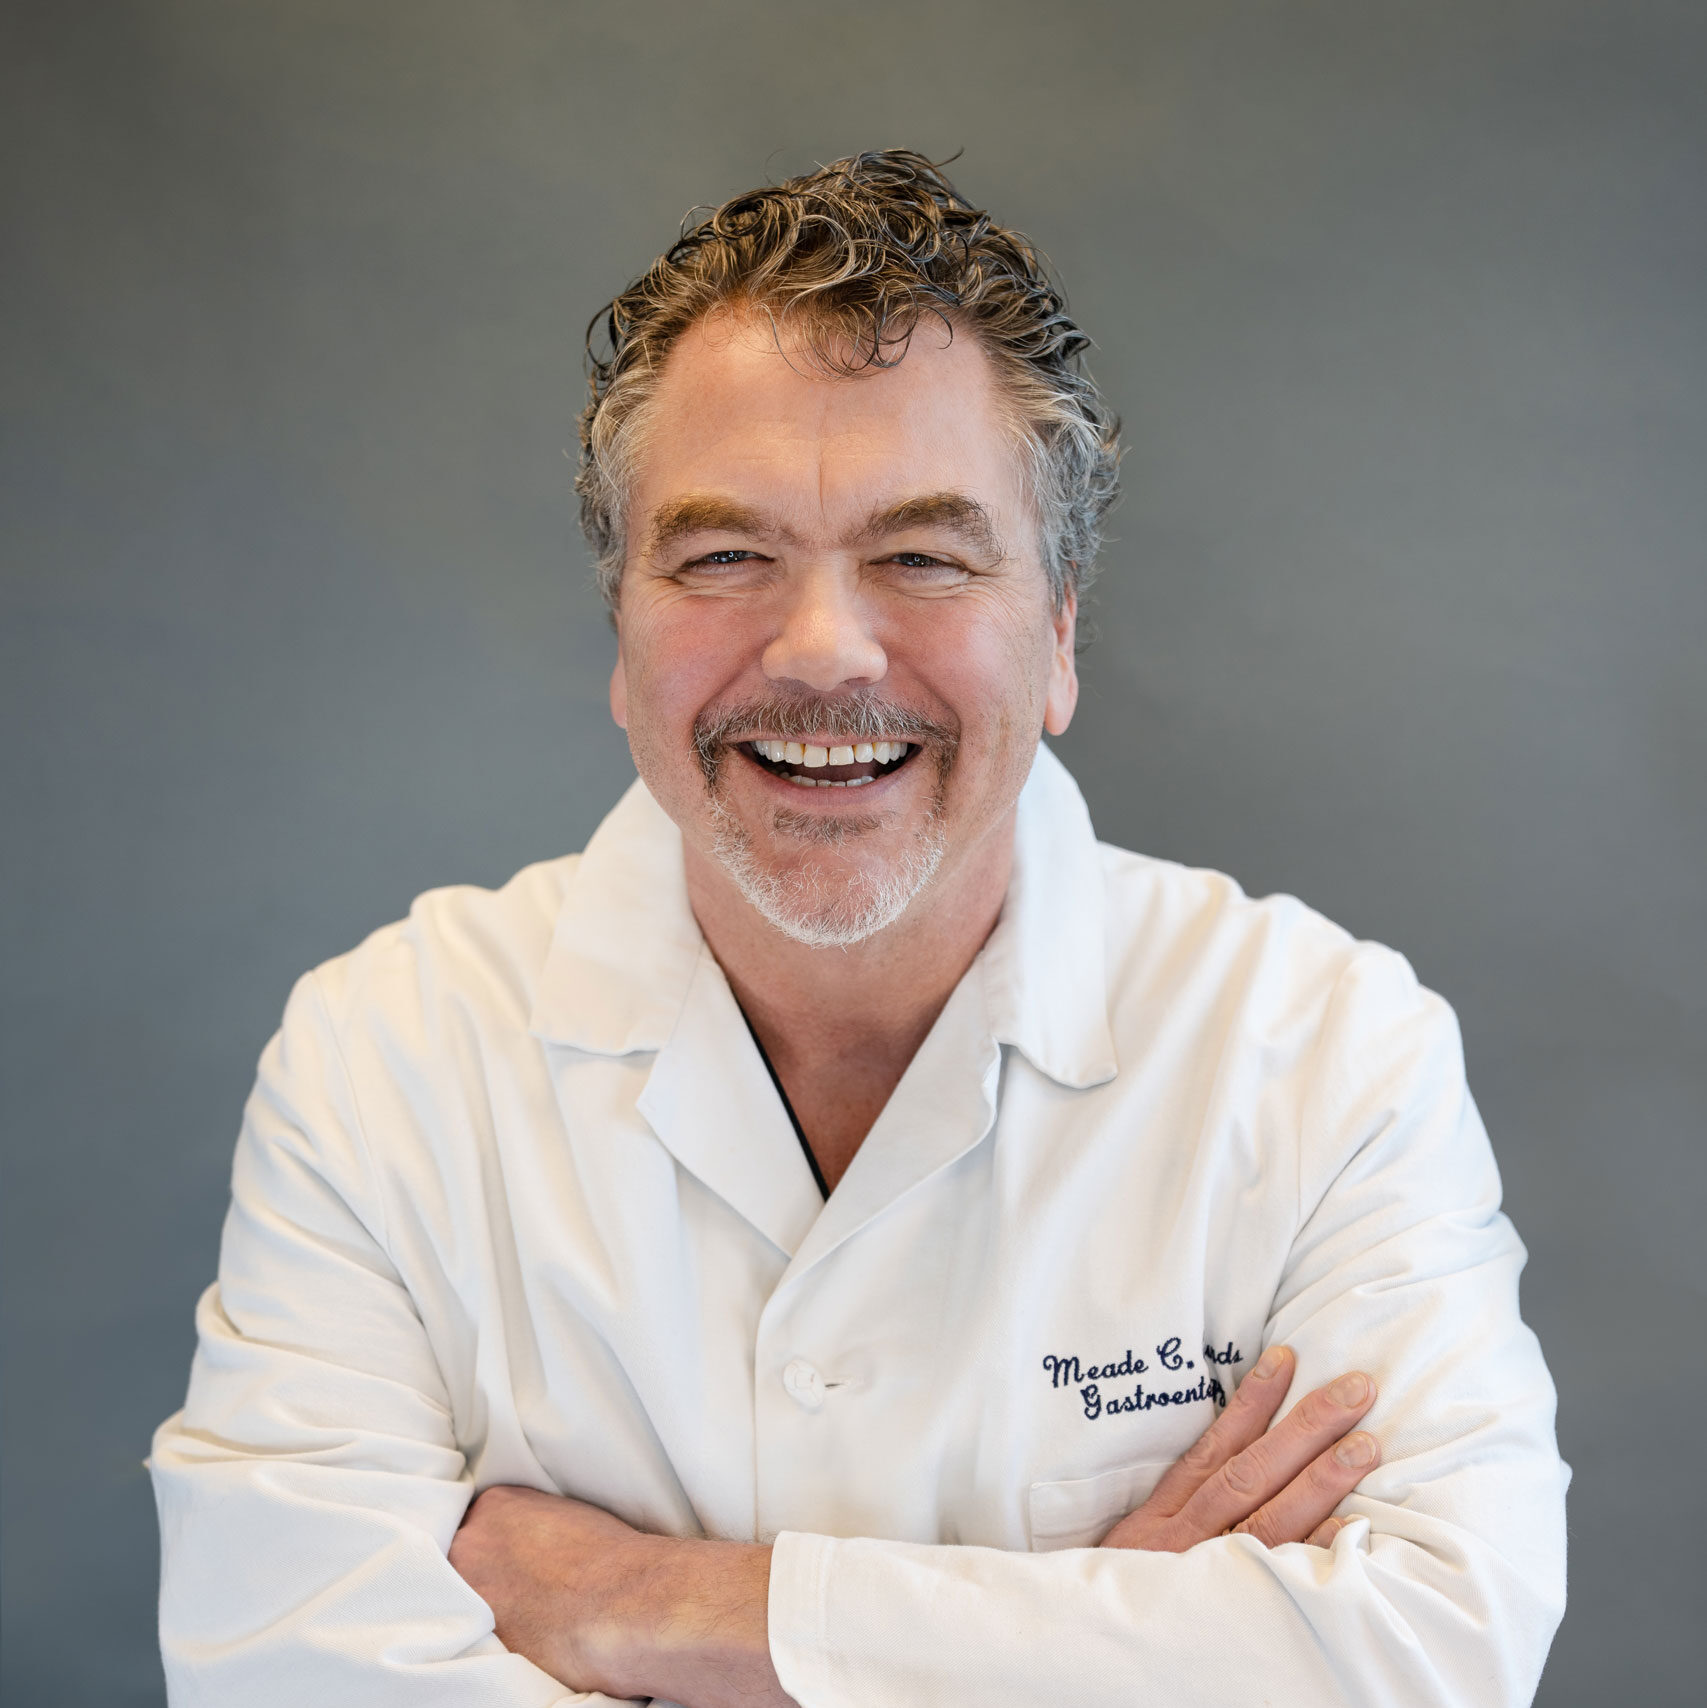 Meade Edmunds, MD, is a leading gastroenterologist and founder of Edmunds Gastroenterology in Knoxville, Tennessee. Dr. Edmunds believes in delivering care of the highest possible quality and creating a safe and compassionate environment for every person he sees